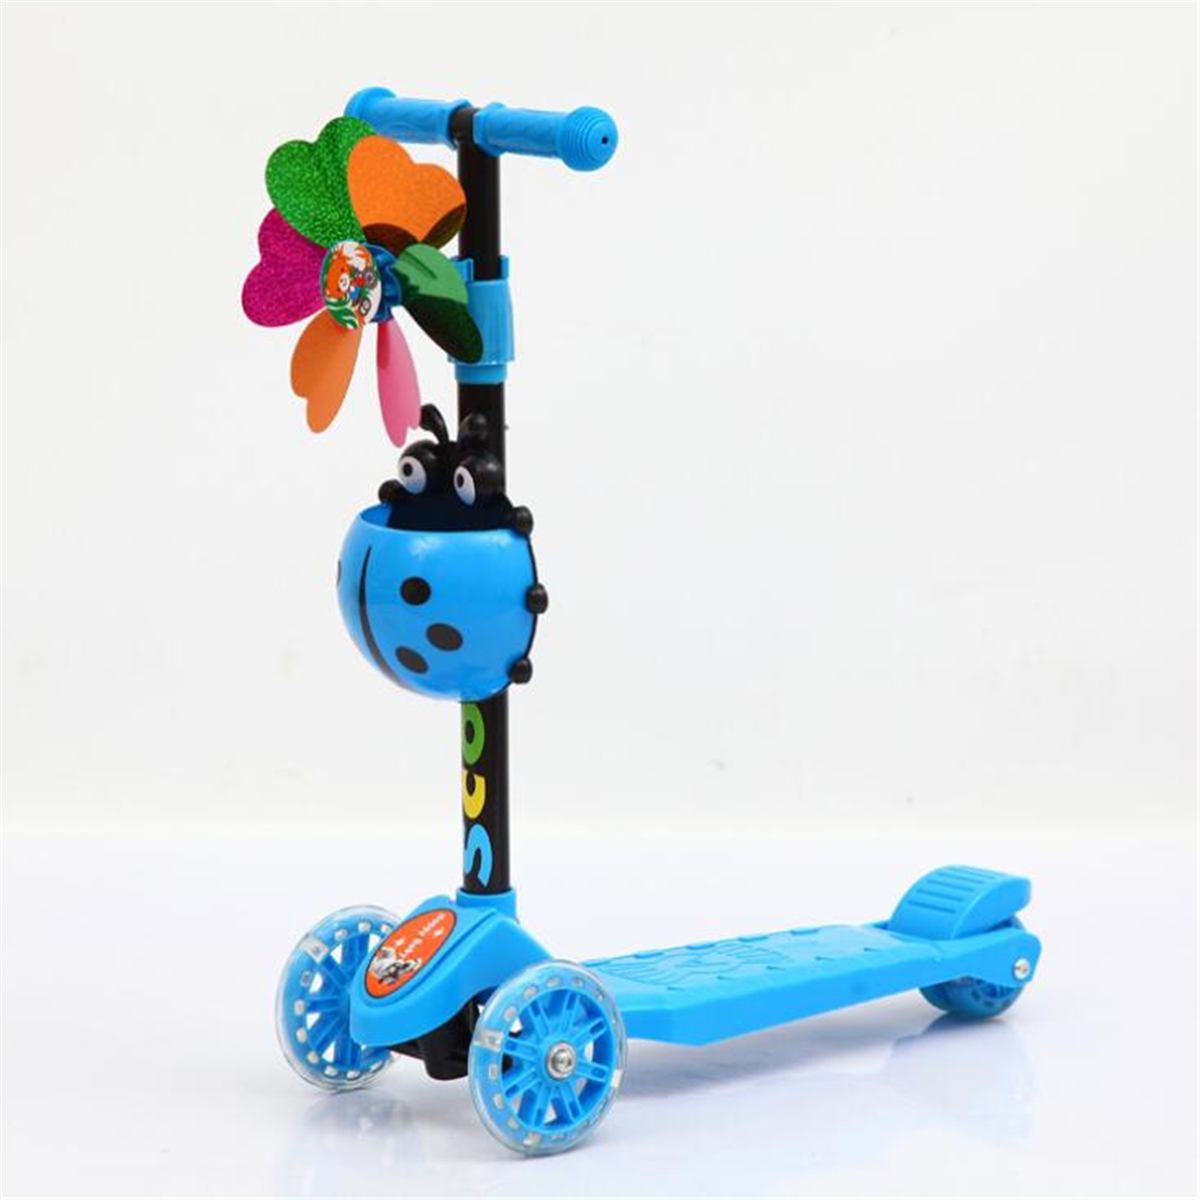 Foldable Toddler 3 Wheel Scooter 4 Level Adjustable T-bar Lean with Music Function & 3 LED Wheels Ideal for Age 2-12 Years Old SANSIRP Kick Scooter for Kids 